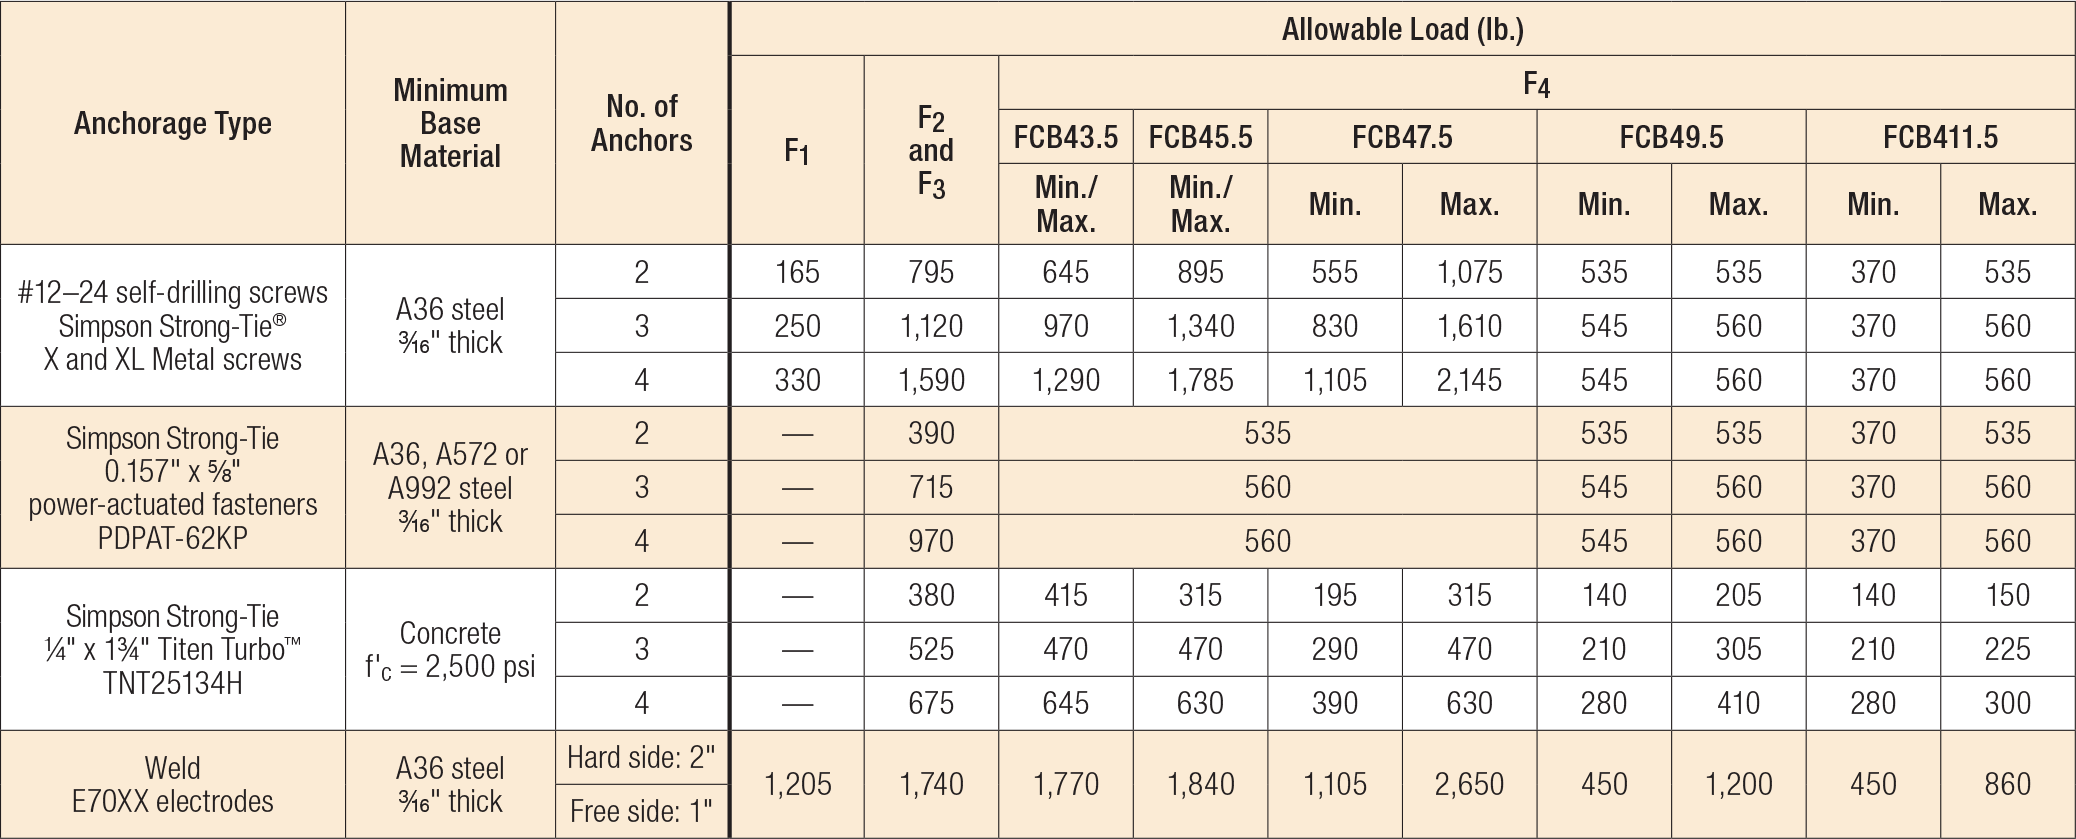 Load Table - FCB Allowable Anchorage Loads